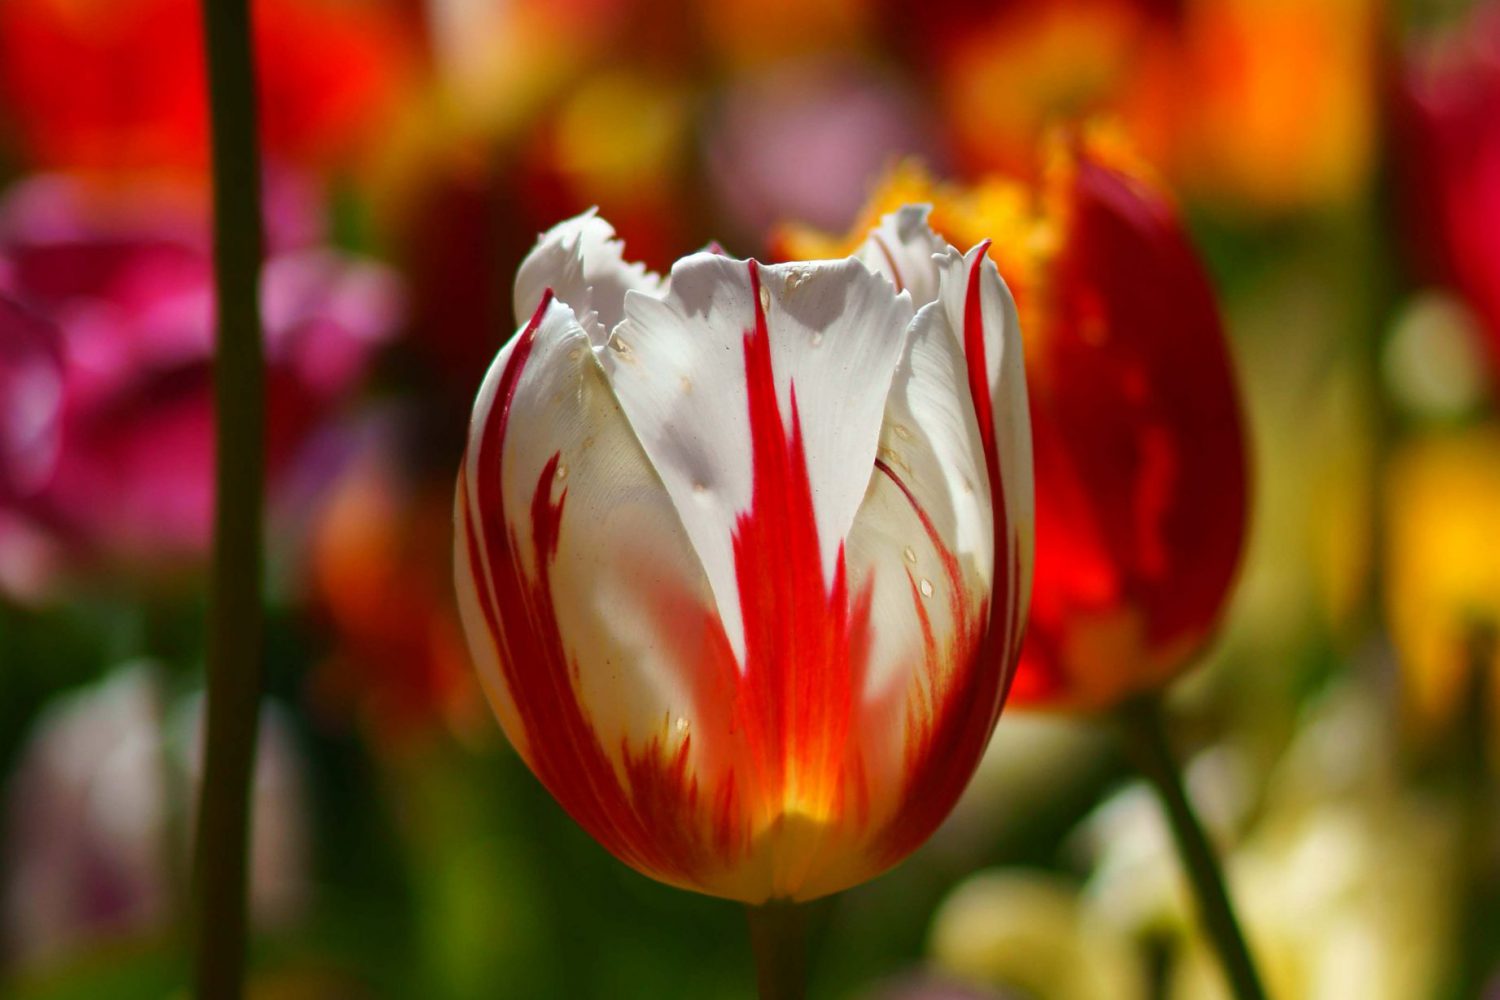 Red and White tulips